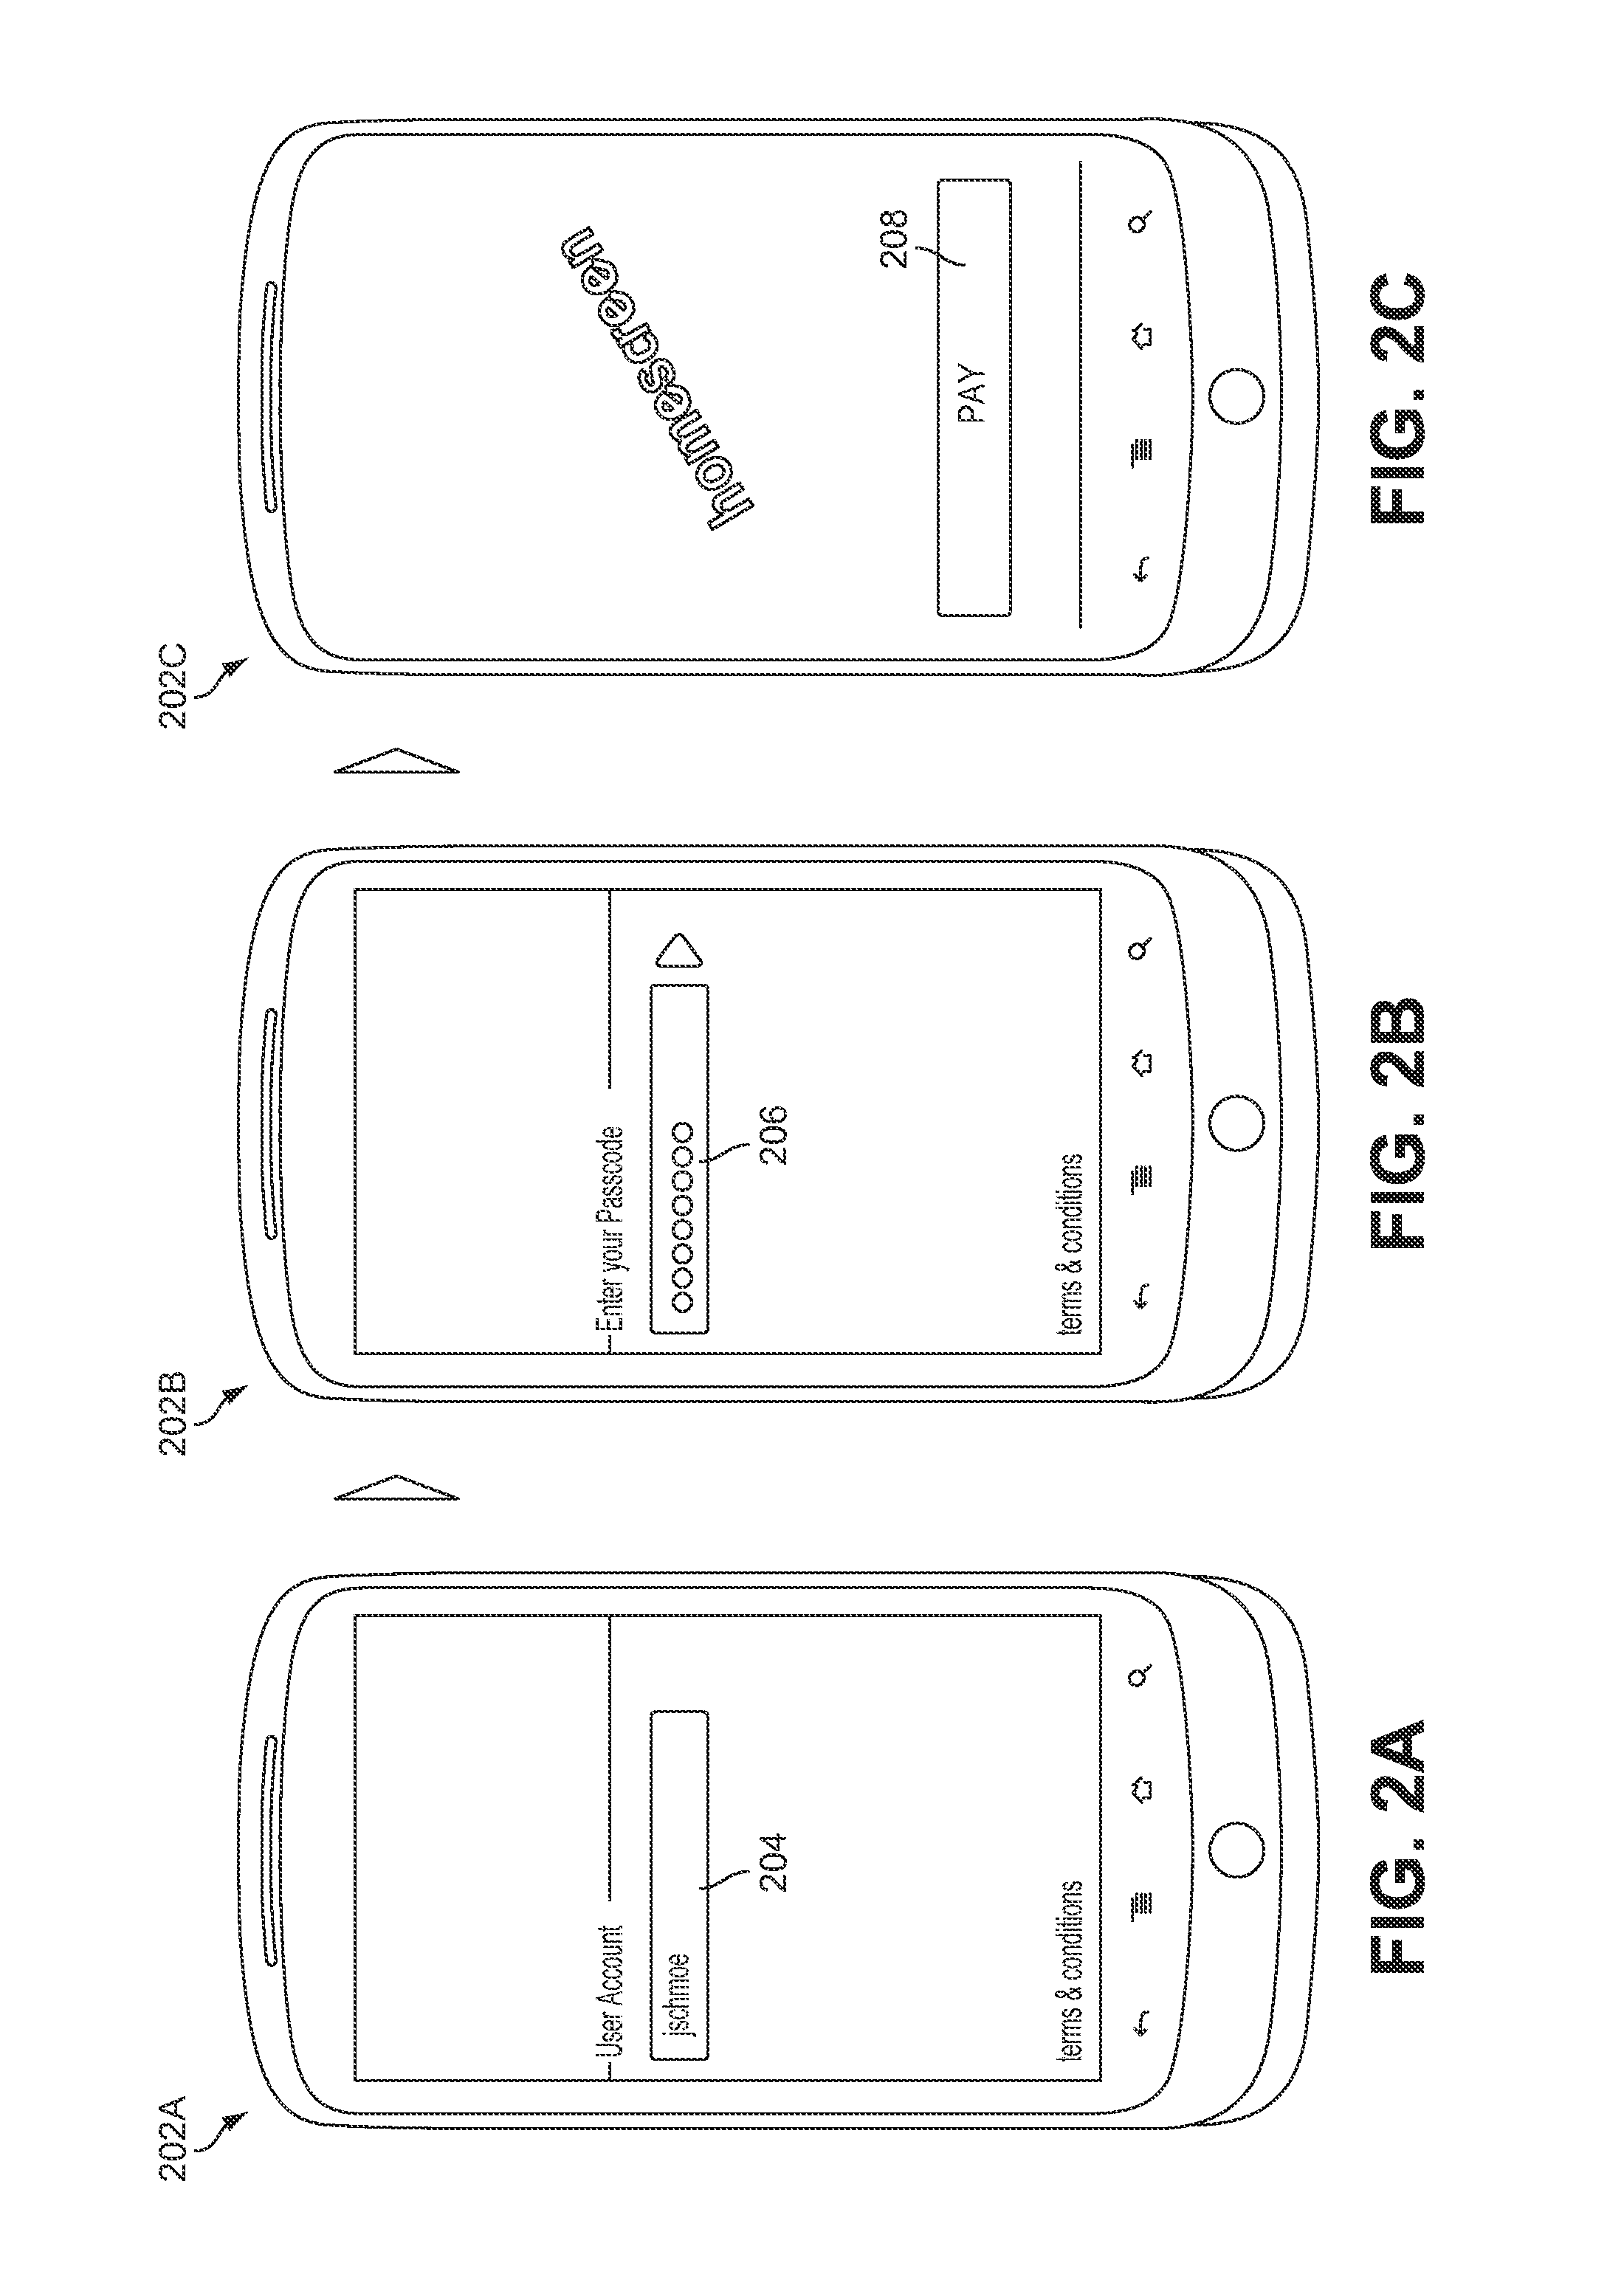 System and method for managing payment in transactions with a pcd